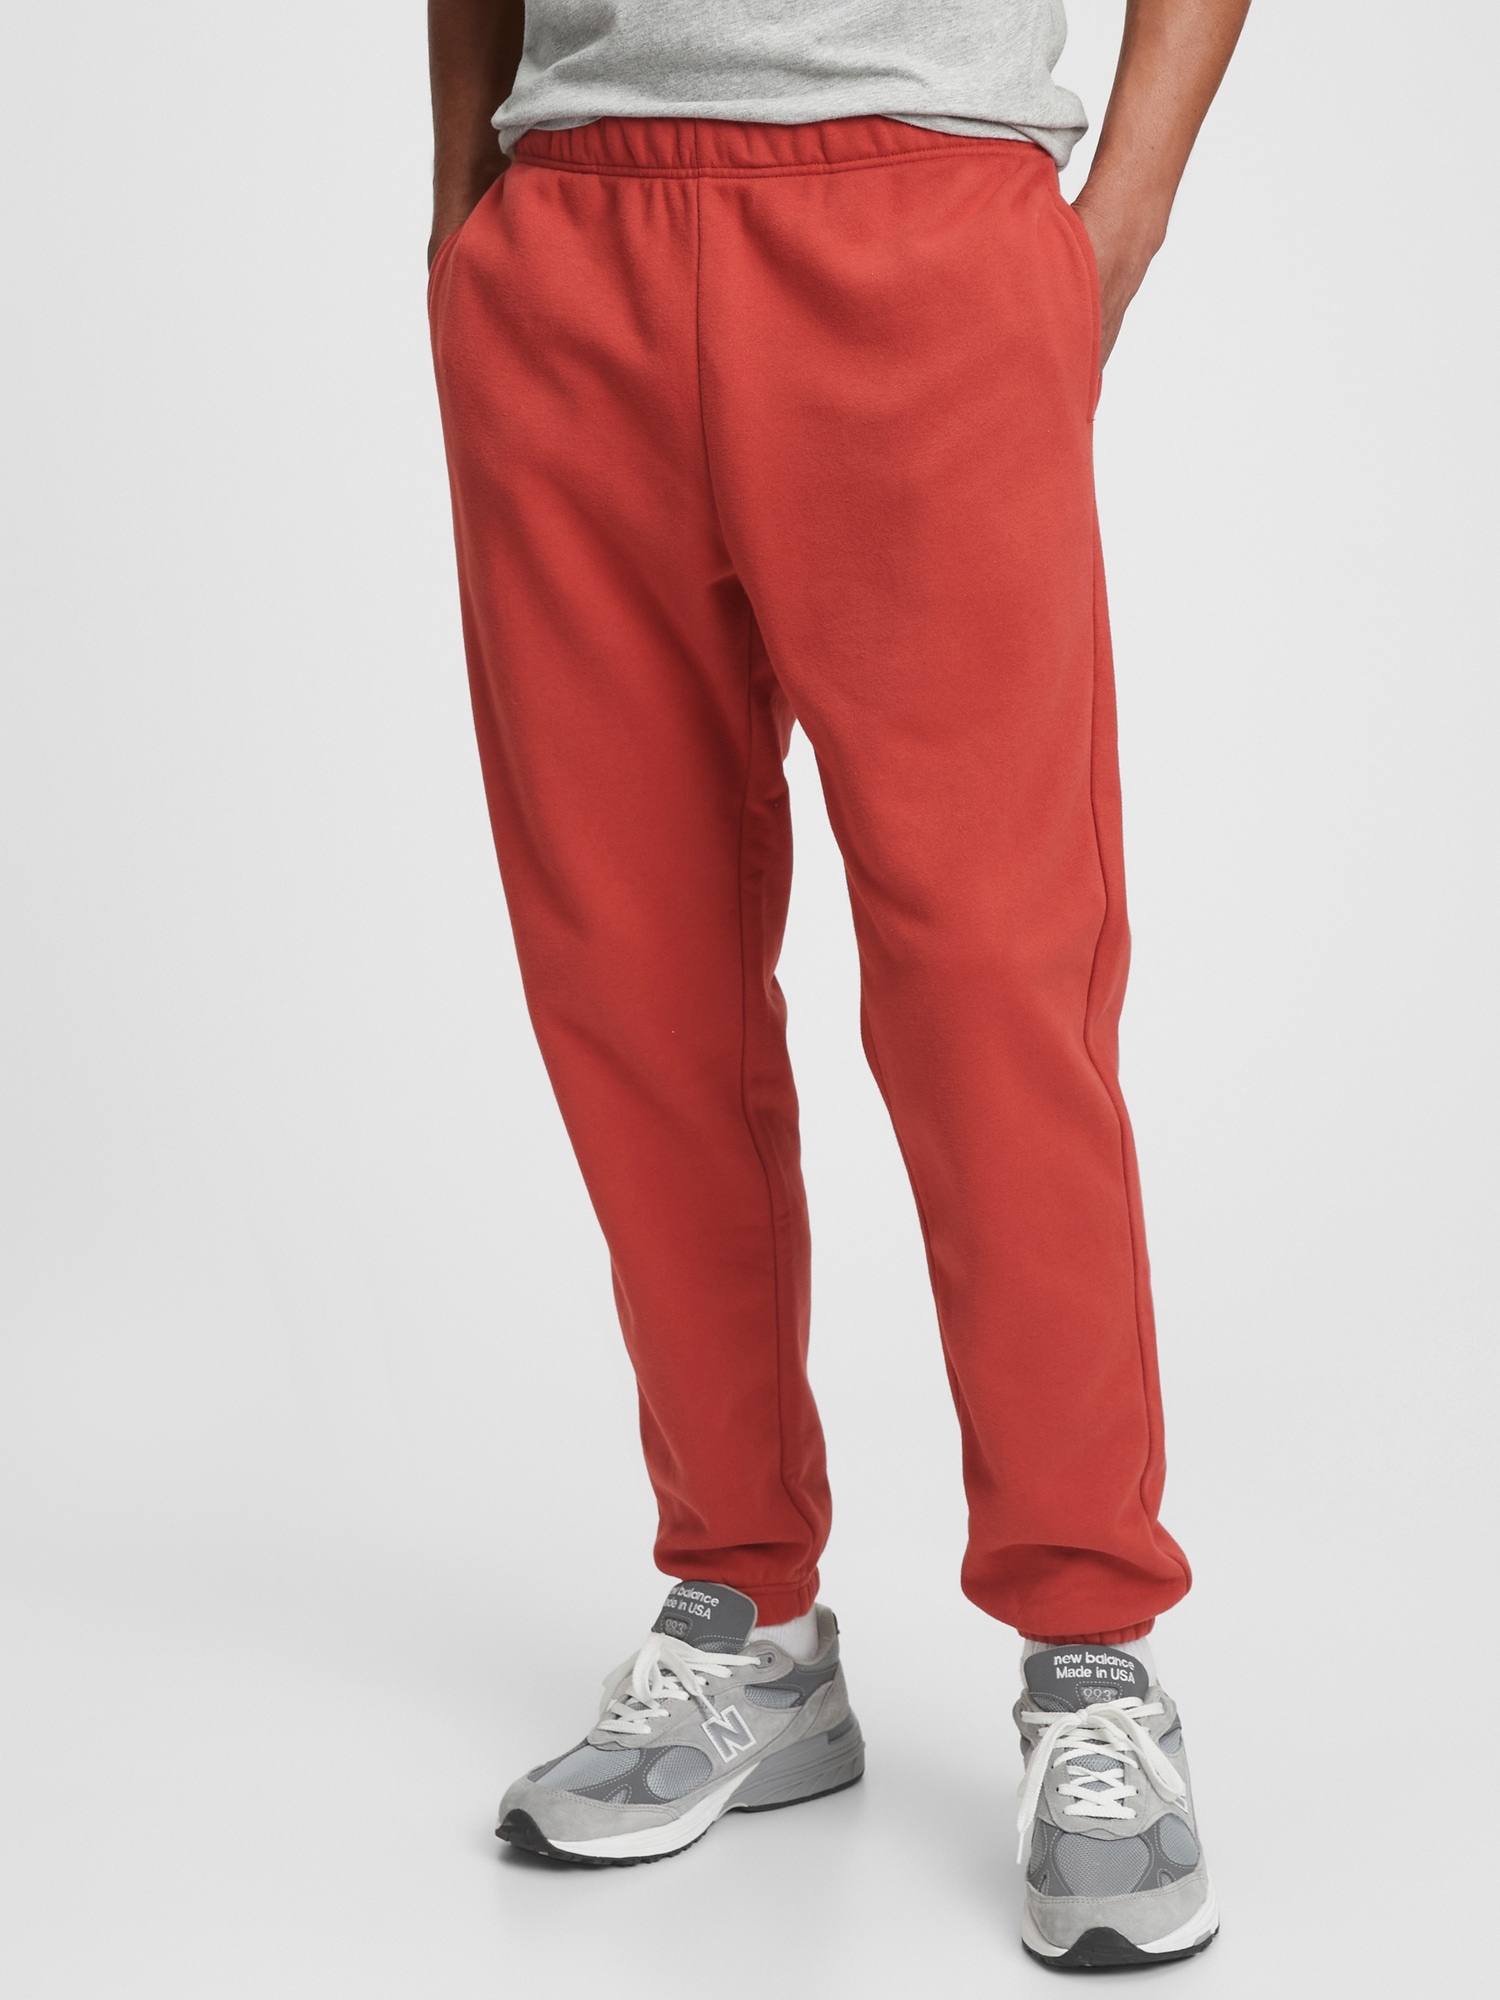 Men’s Vintage Soft Joggers reduce to $7.99